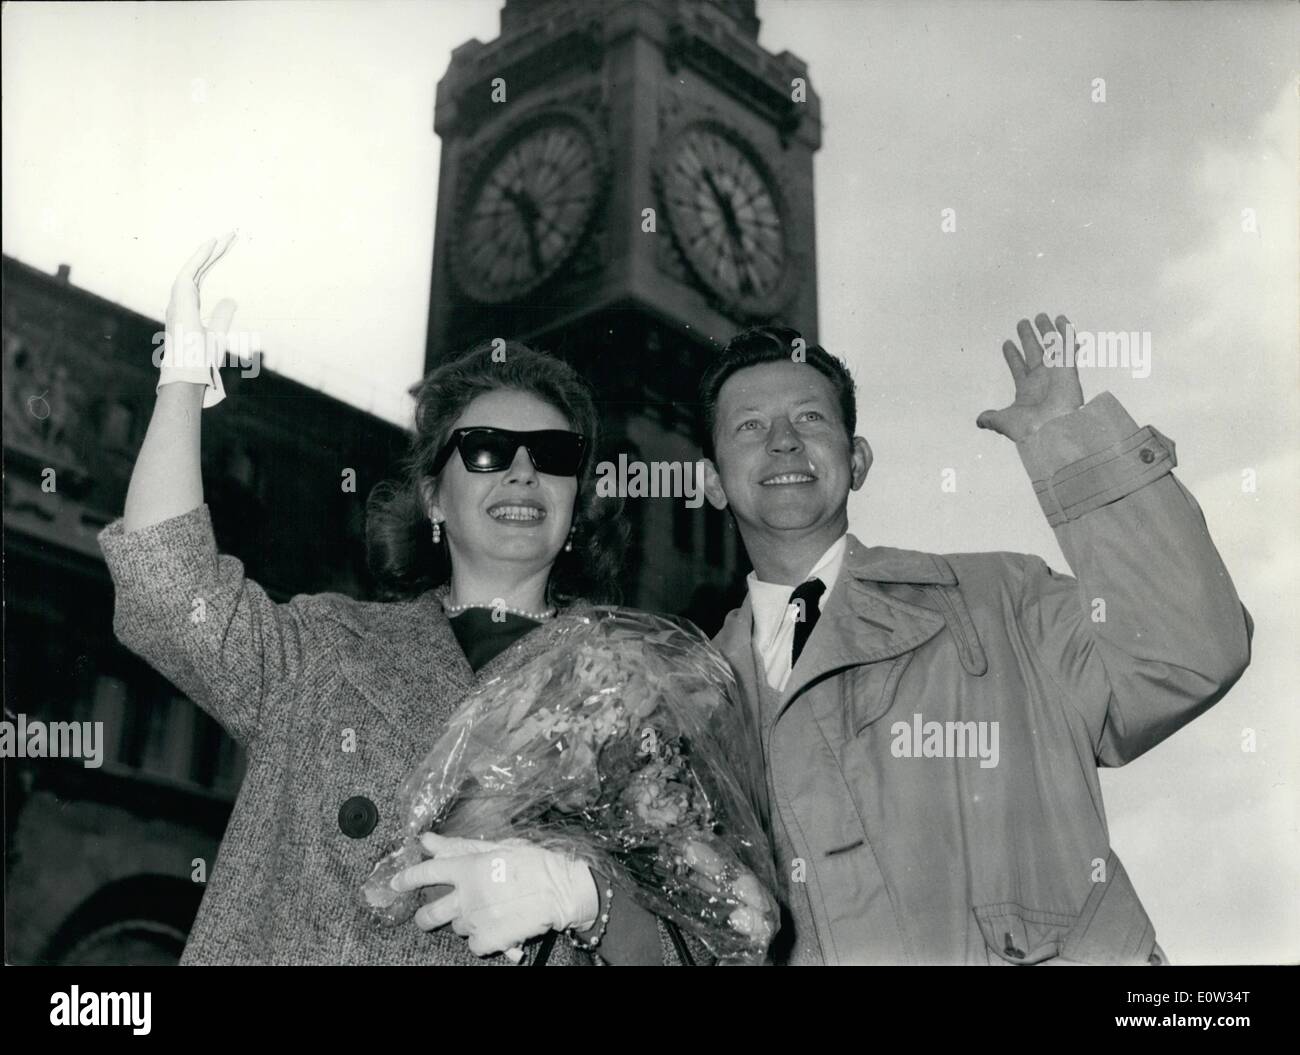 Mar. 03, 1961 - Hollywood's best paid actor arrives in Paris; Donald O'Connor, Hollywood best paid actor (99 films) arrived in Paris from Rome to day. In his 100th film ''Arabian nights'' he plays the role of Aladin. Photo Shows Donald O'Connor and his wife Gloria pictured on their arrival at the care de Lyon this morning. Stock Photo